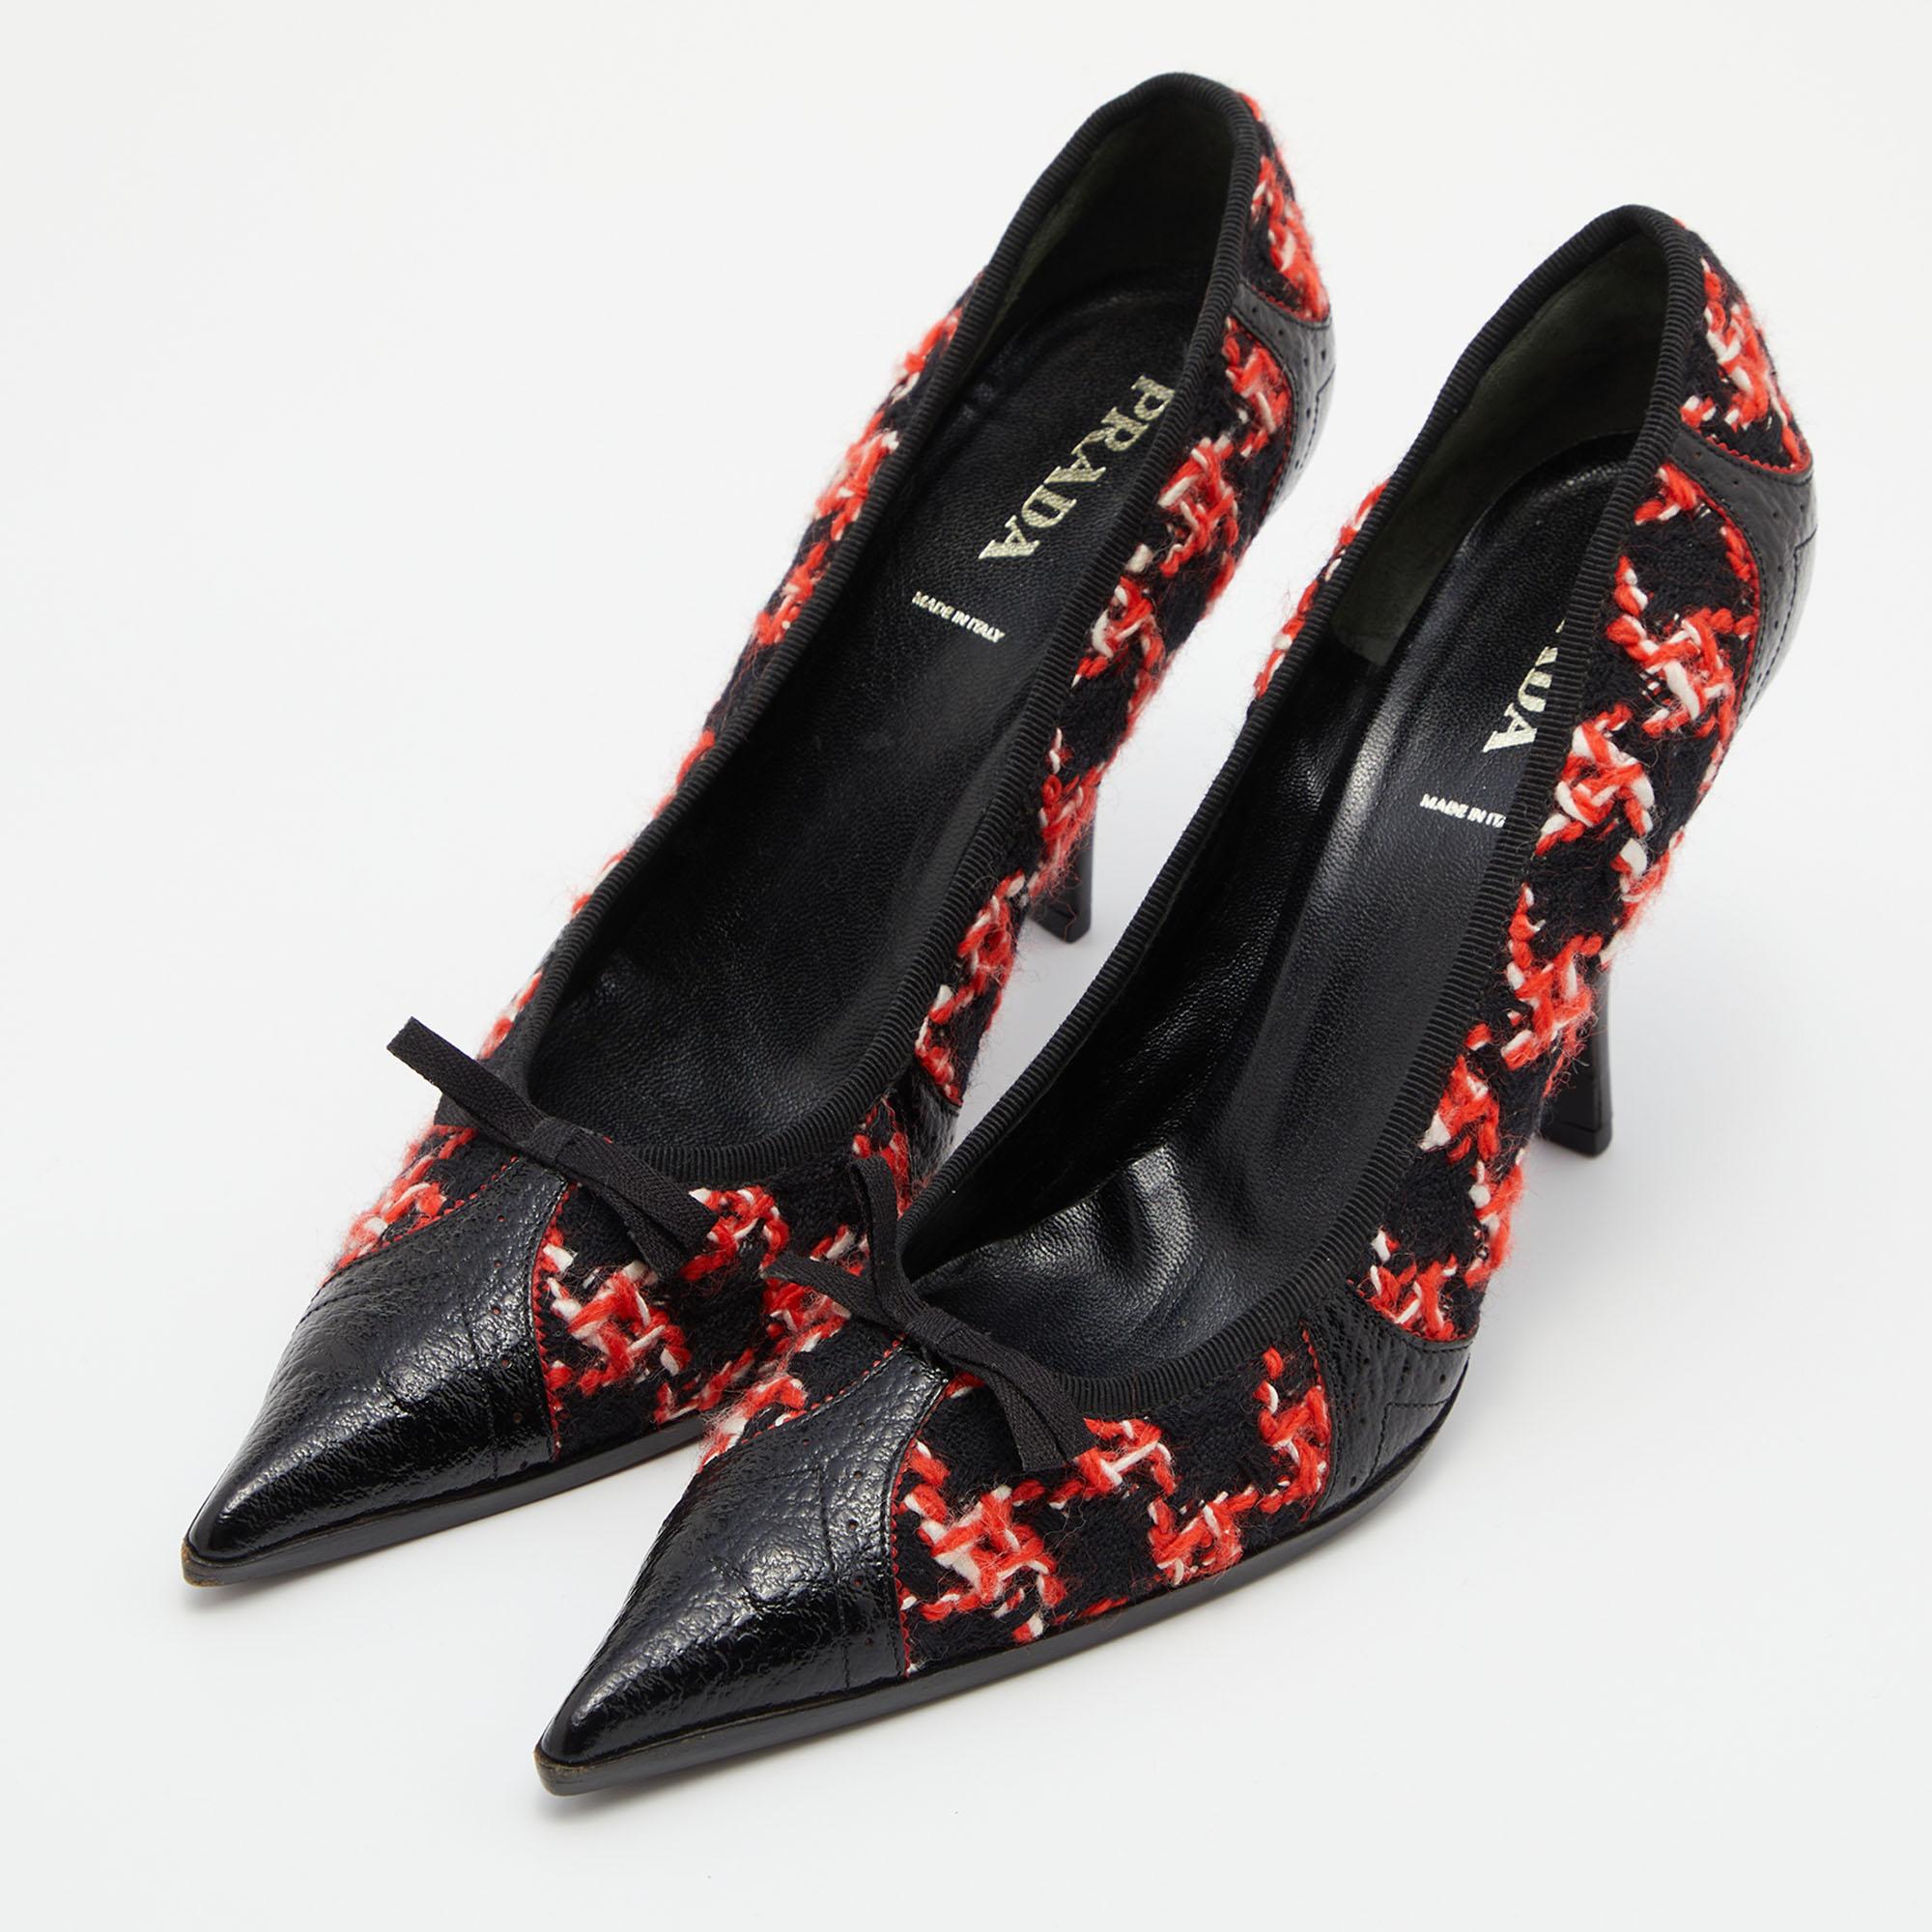 Prada Black/Red Tweed and Leather Pointed Toe Bow Detail Pumps 40 1